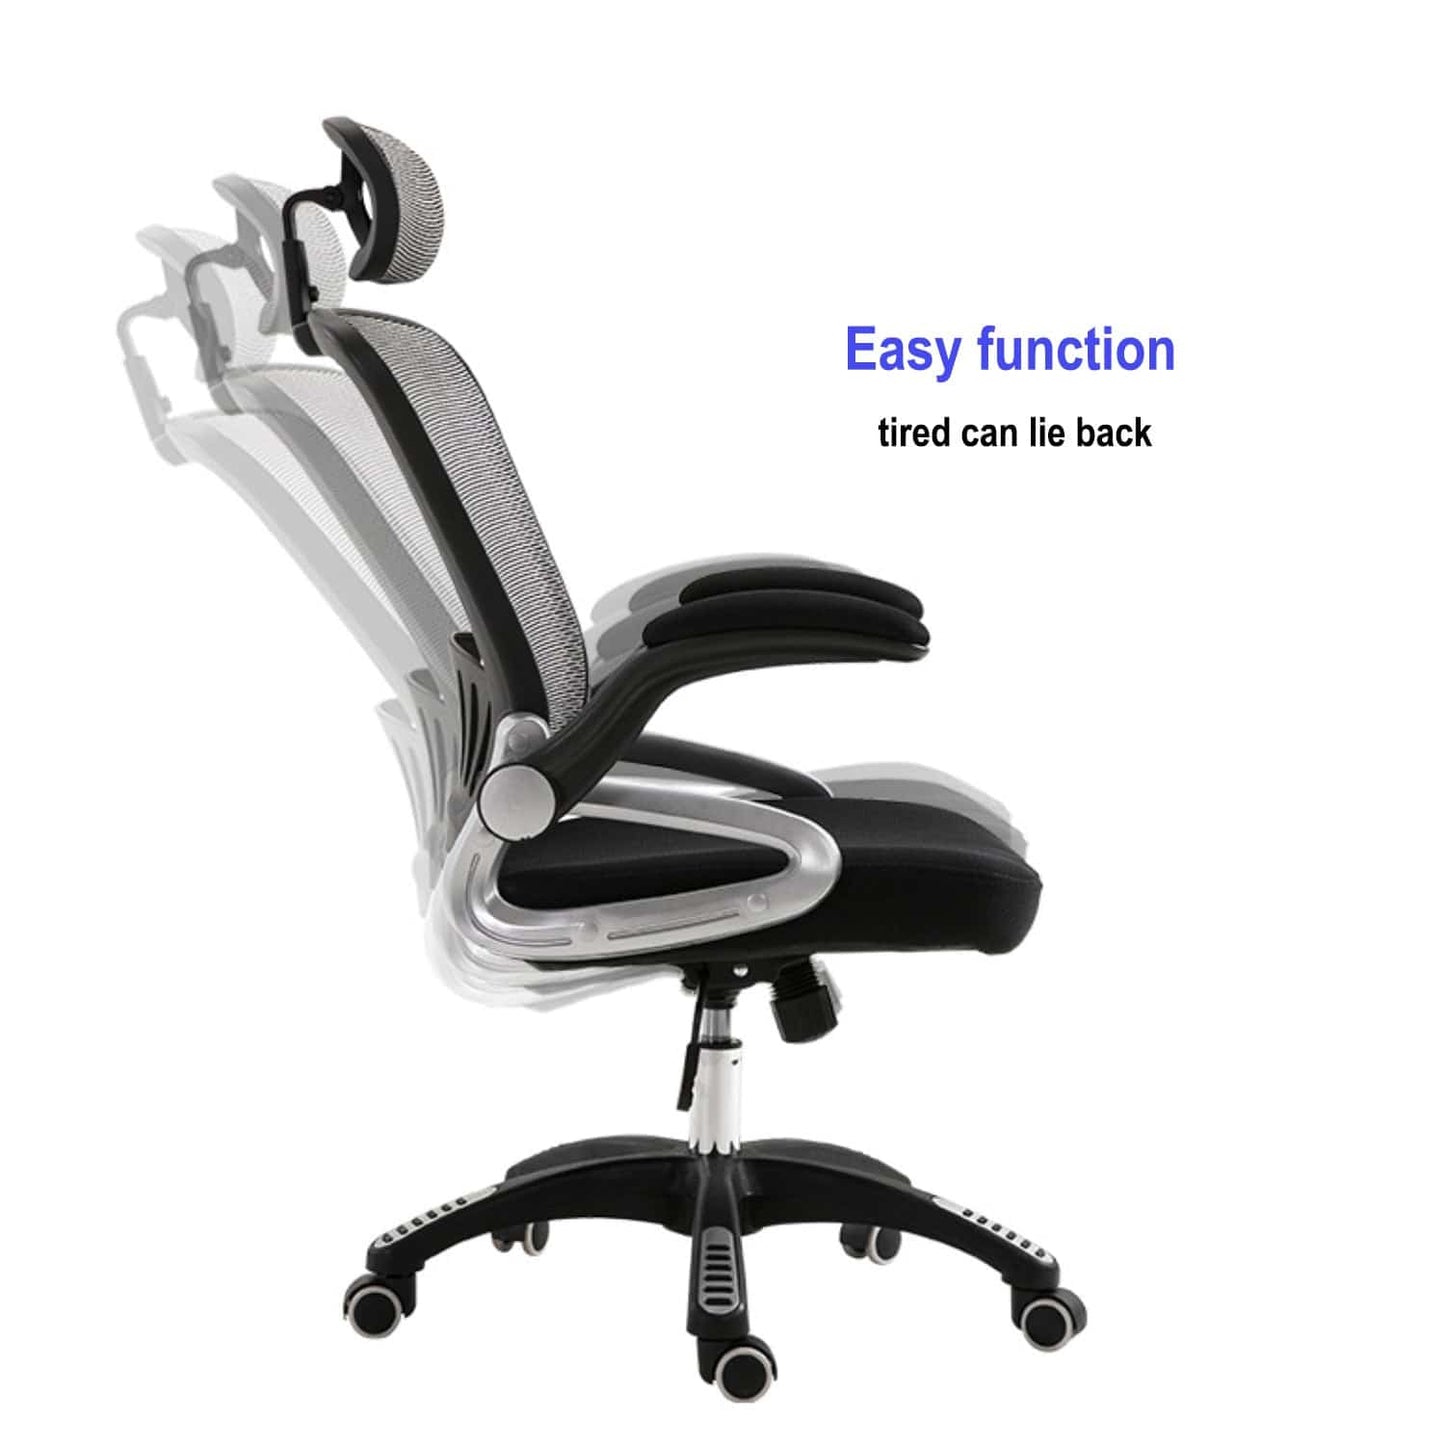 COOLBABY BGY03 COOLBABY Ergonomic Office Gaming Chair - COOL BABY